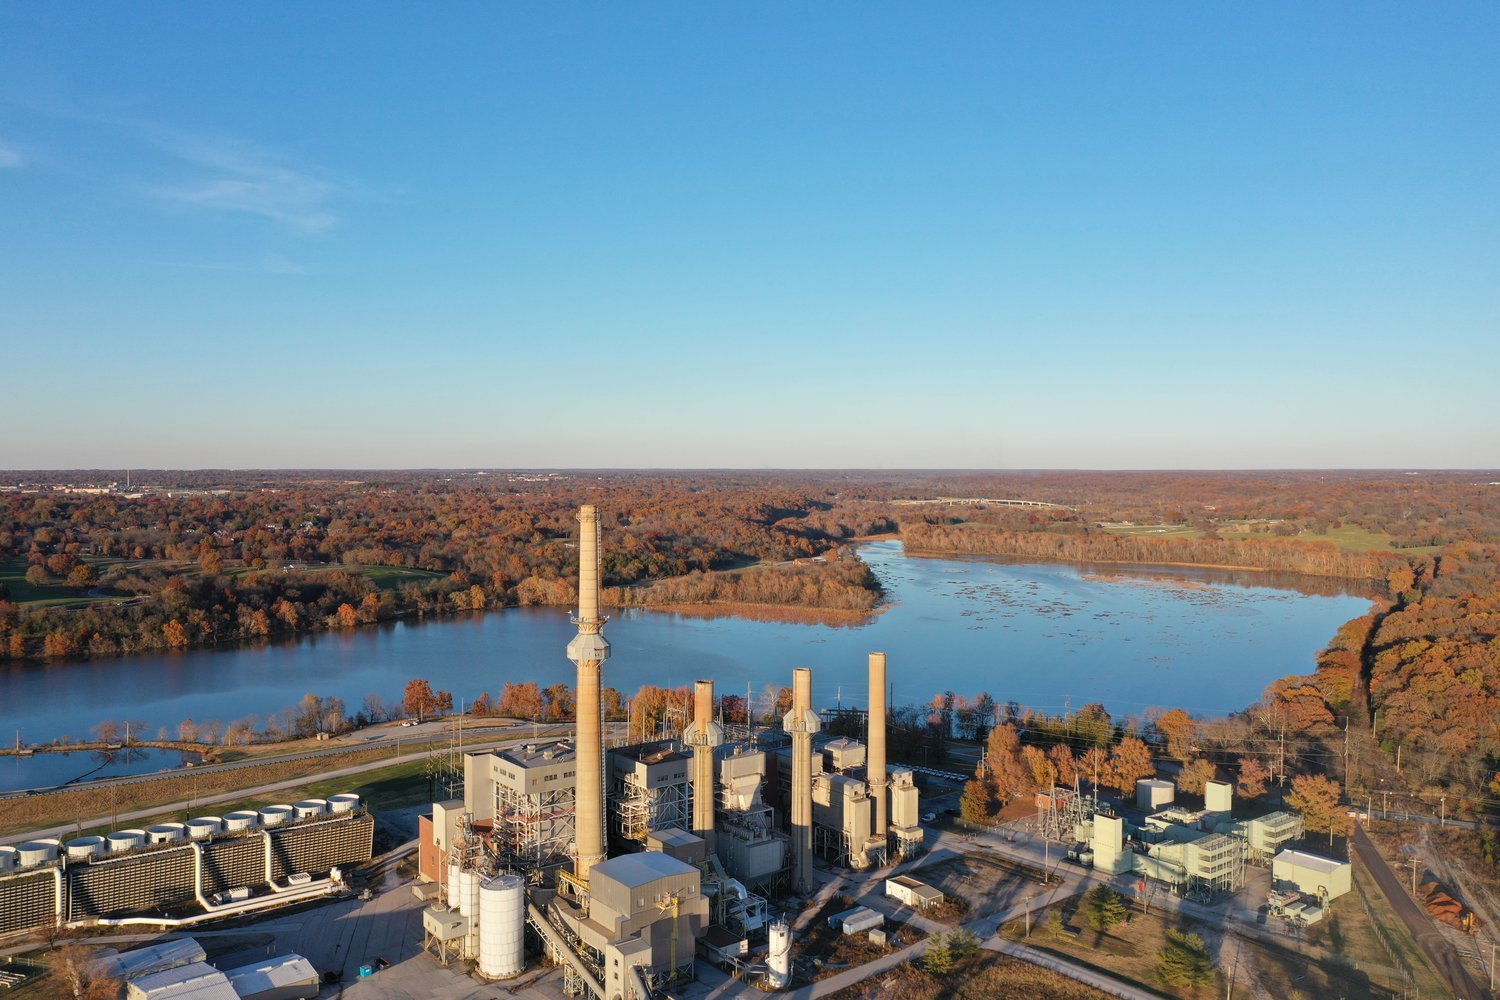 Multiple redevelopment proposals are being floated for the decommissioned James River Power Station and the adjacent Lake Springfield area.